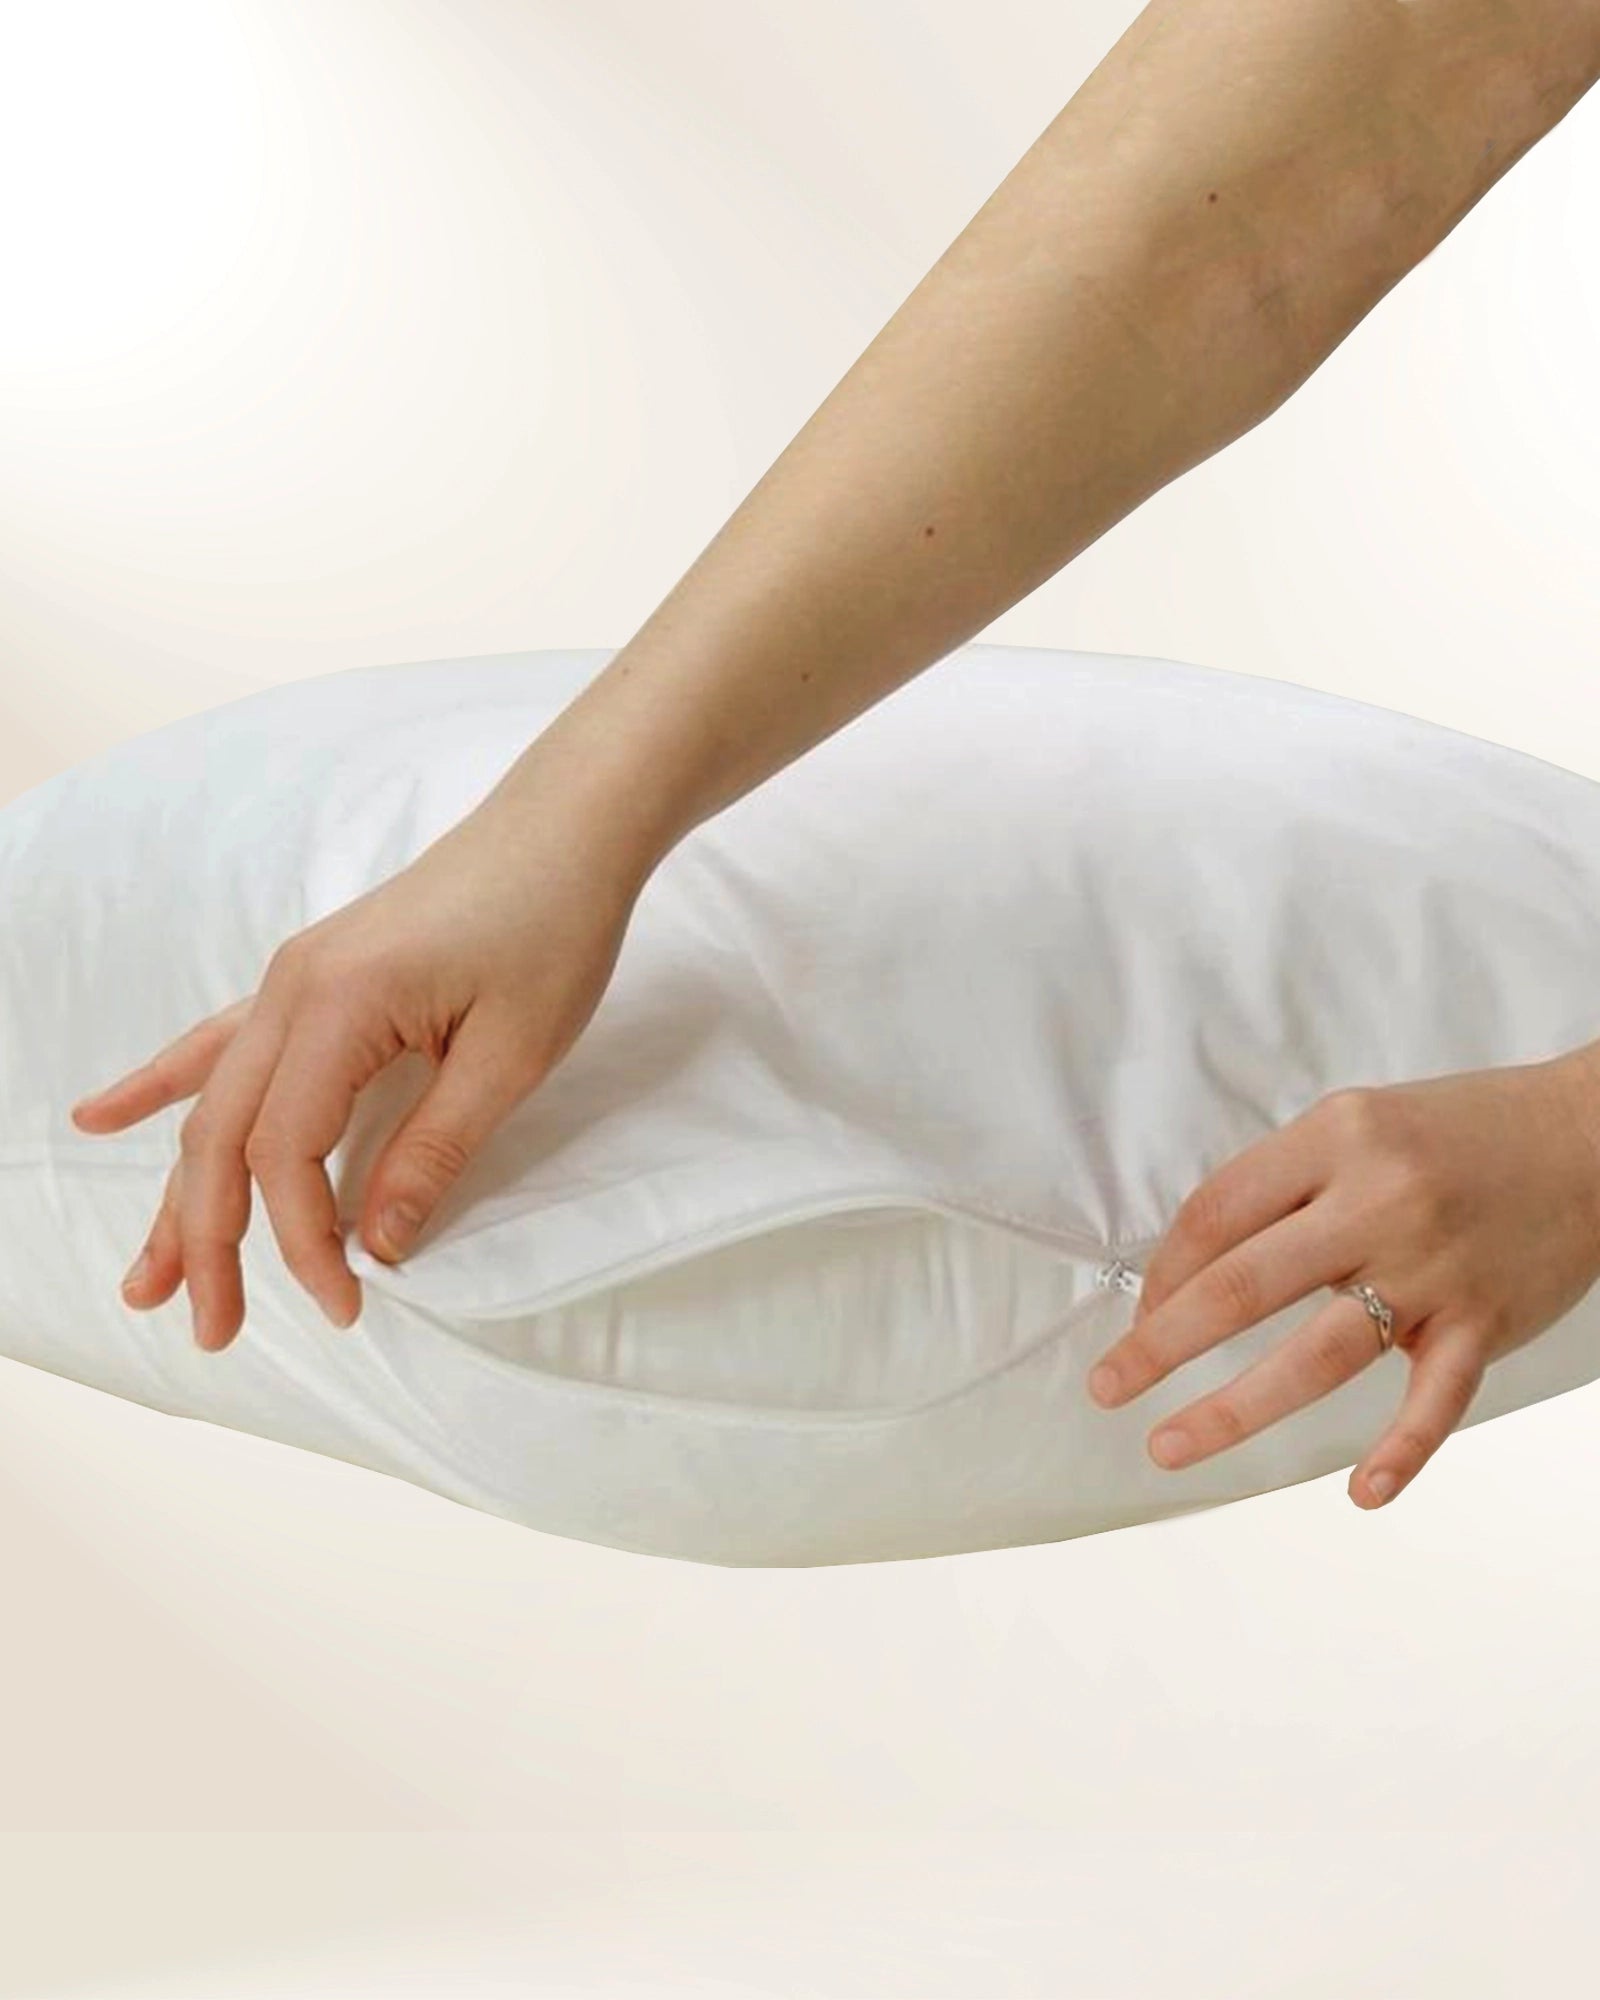 Pillow Protector White